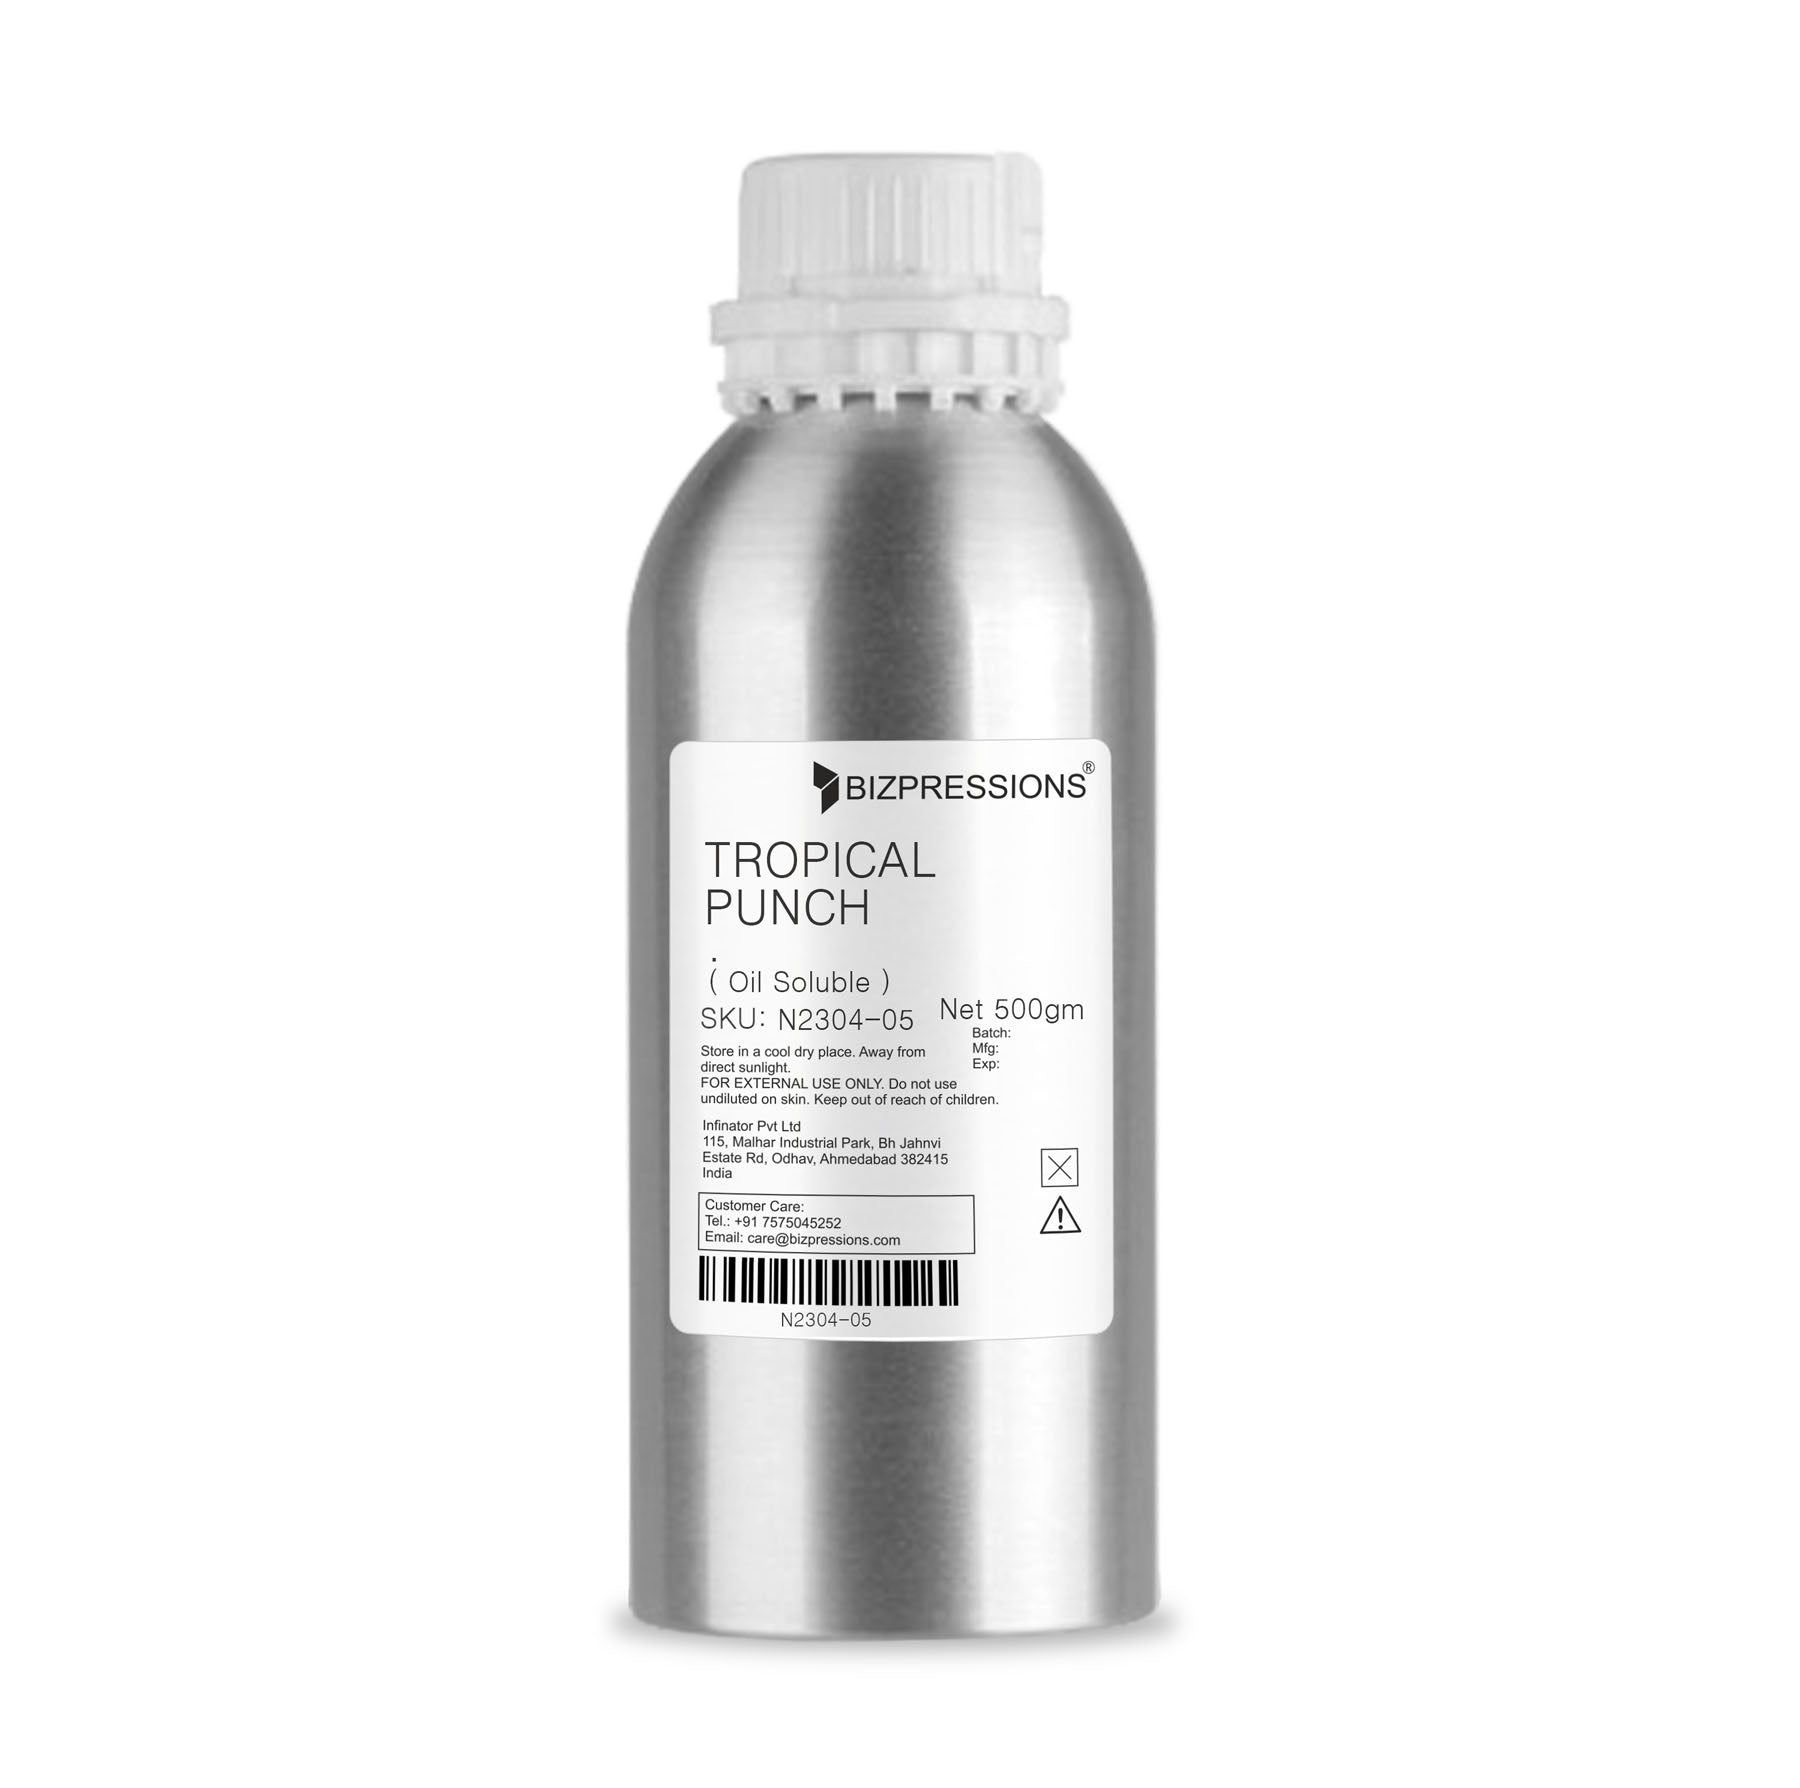 TROPICAL PUNCH - Fragrance ( Oil Soluble ) - 500 gm